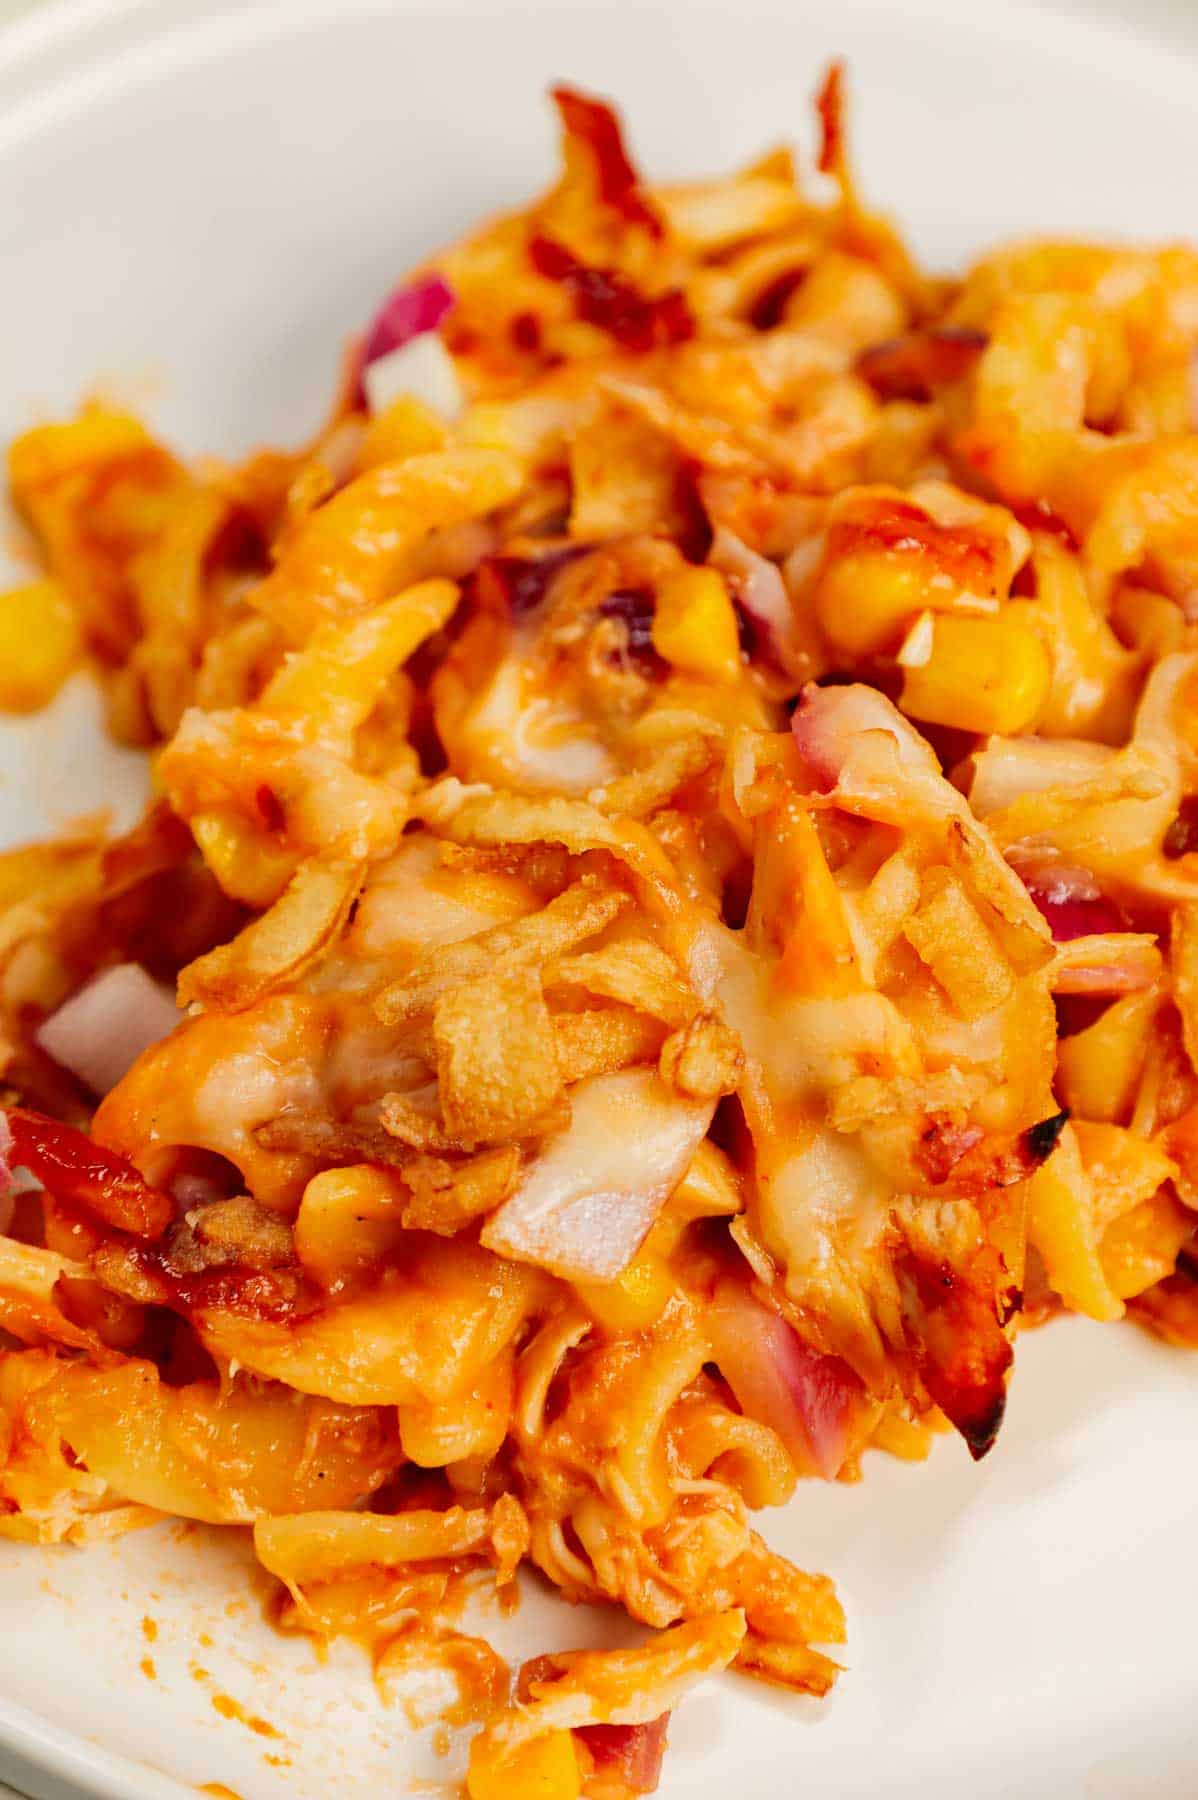 BBQ Chicken Casserole is a hearty dish loaded with egg noodles, shredded rotisserie chicken, diced red onions, corn, cream of chicken soup, barbecue sauce, cheese and French's crispy fried onions.